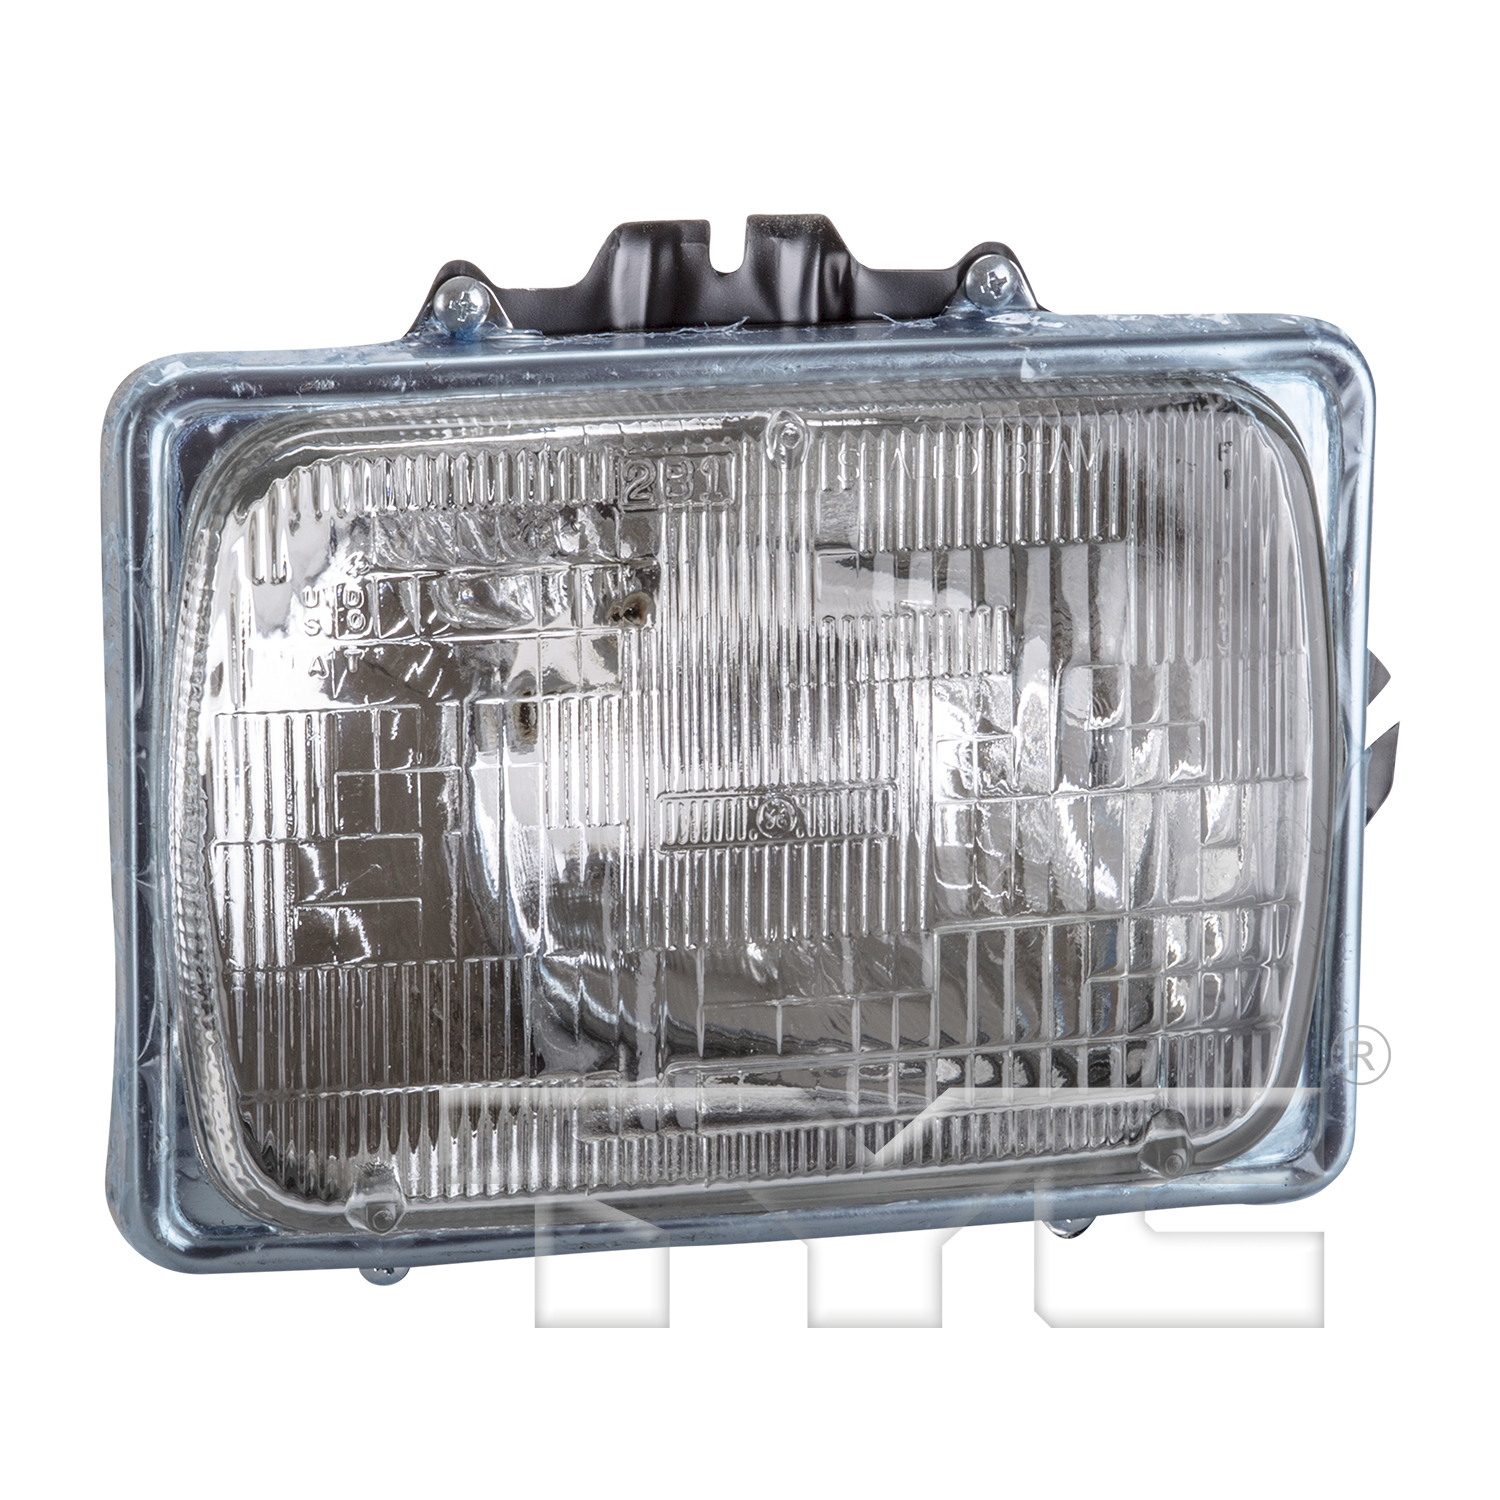 Aftermarket HEADLIGHTS for FORD - F-350 SUPER DUTY, F-350 SUPER DUTY,99-07,RT Headlamp assy sealed beam